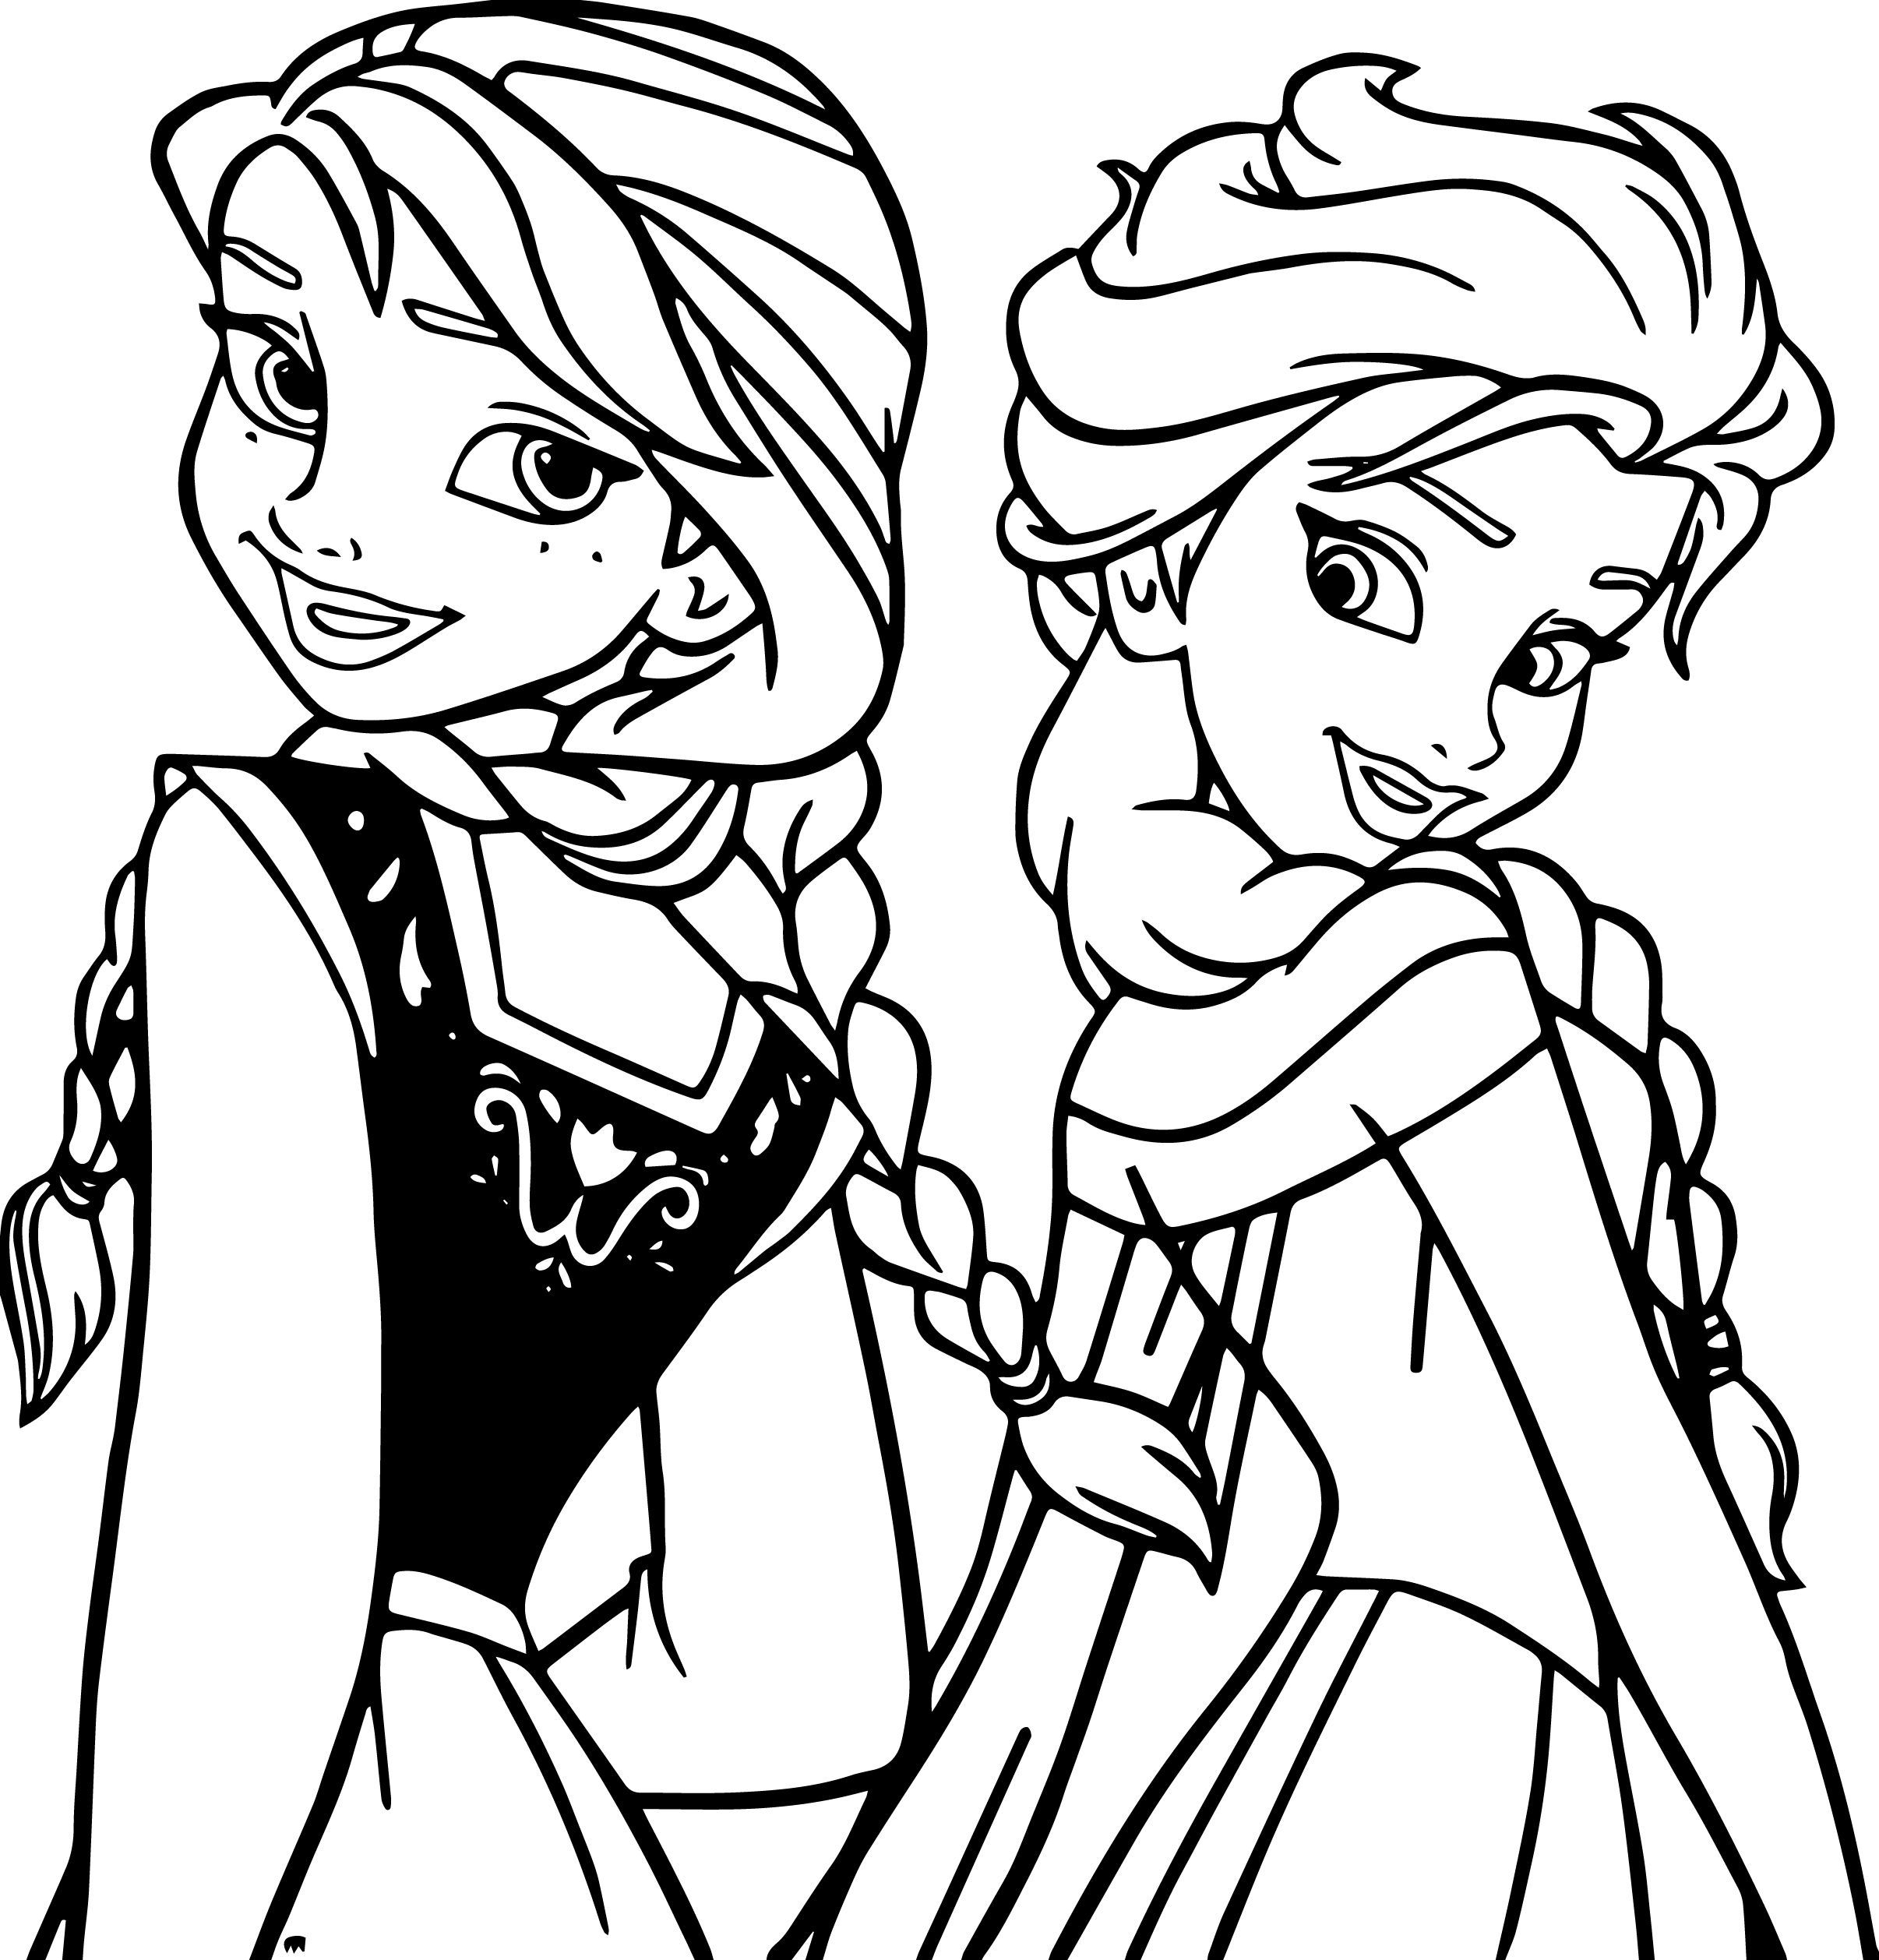 Coloring Pages : Staggering Free Printable Frozen Coloring Pages For - Free Printable Frozen Coloring Pages